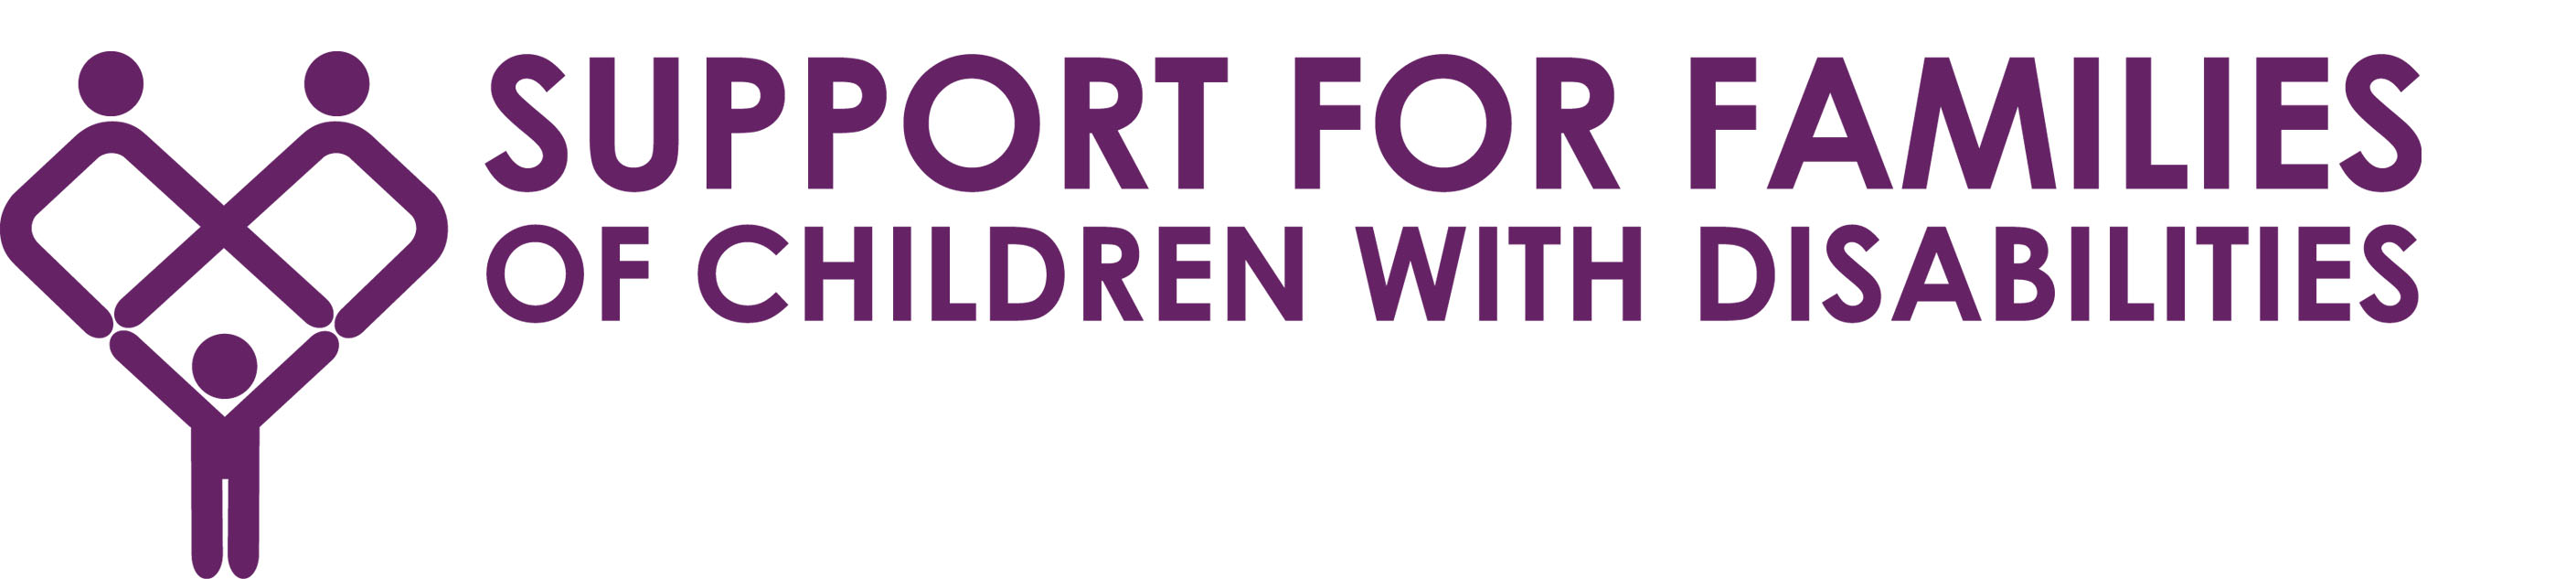 Support for Families of Children with Disabilities